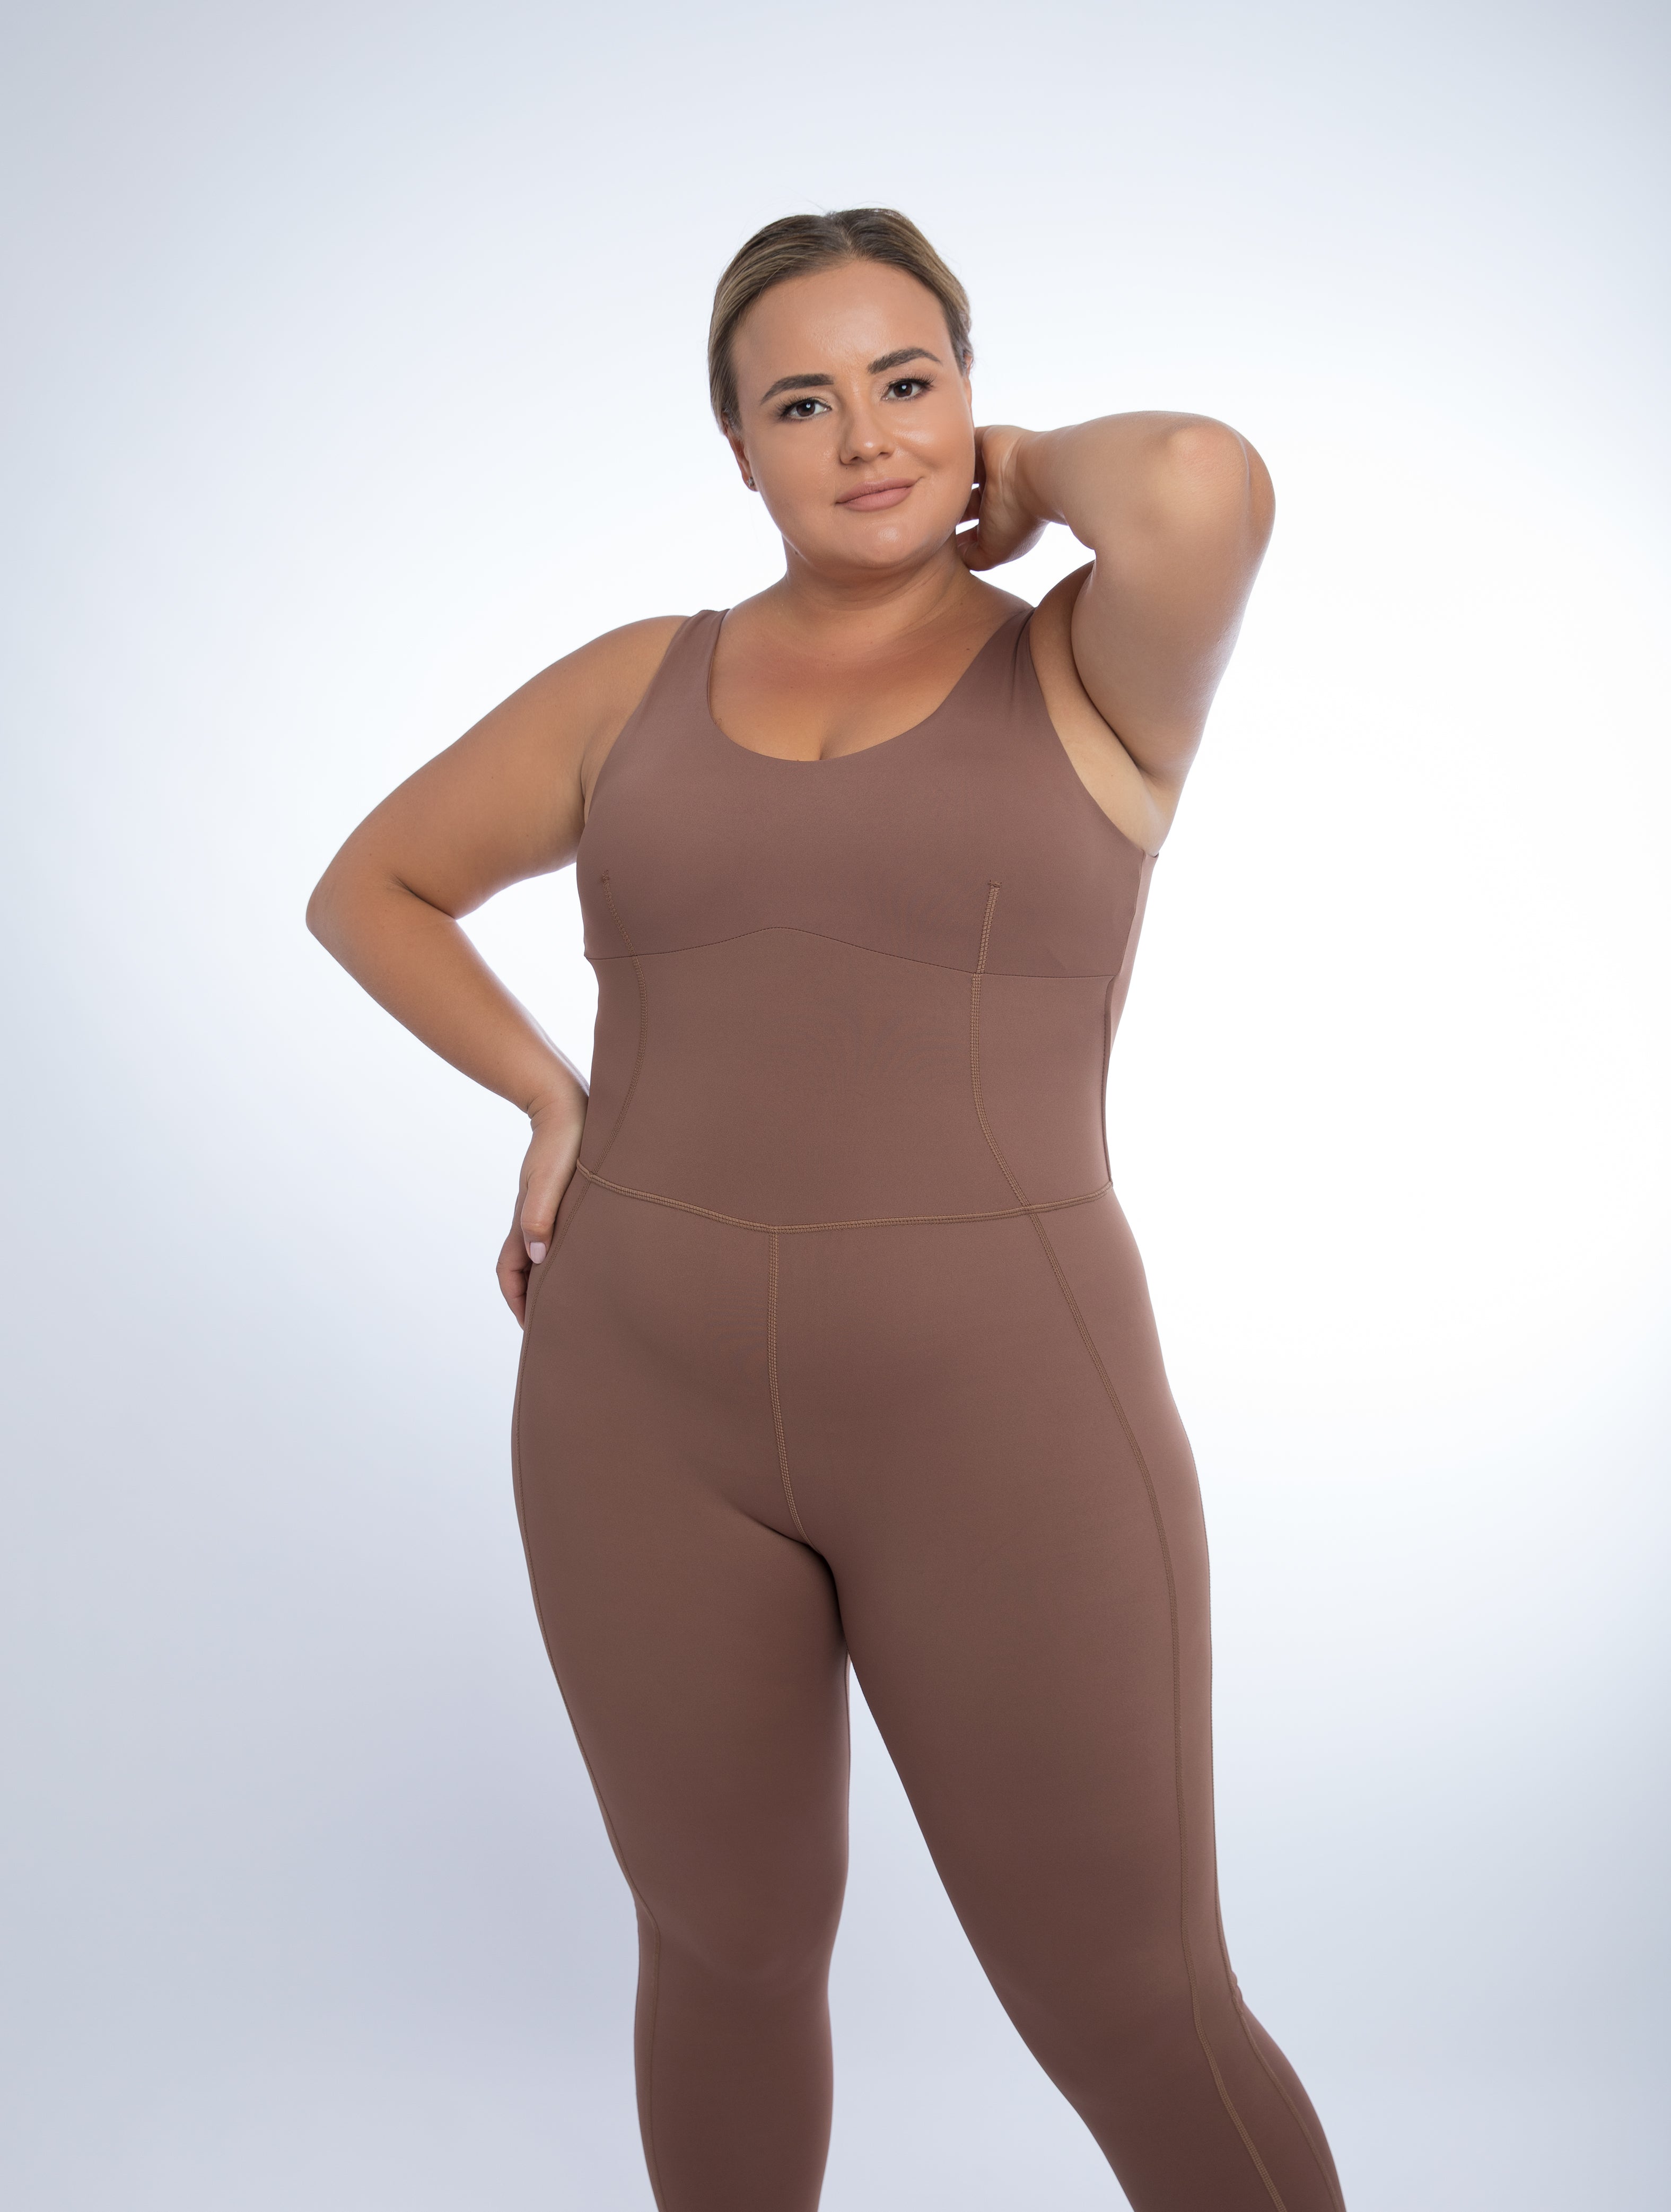 full body compression suit for women jumpsuits for women plus size